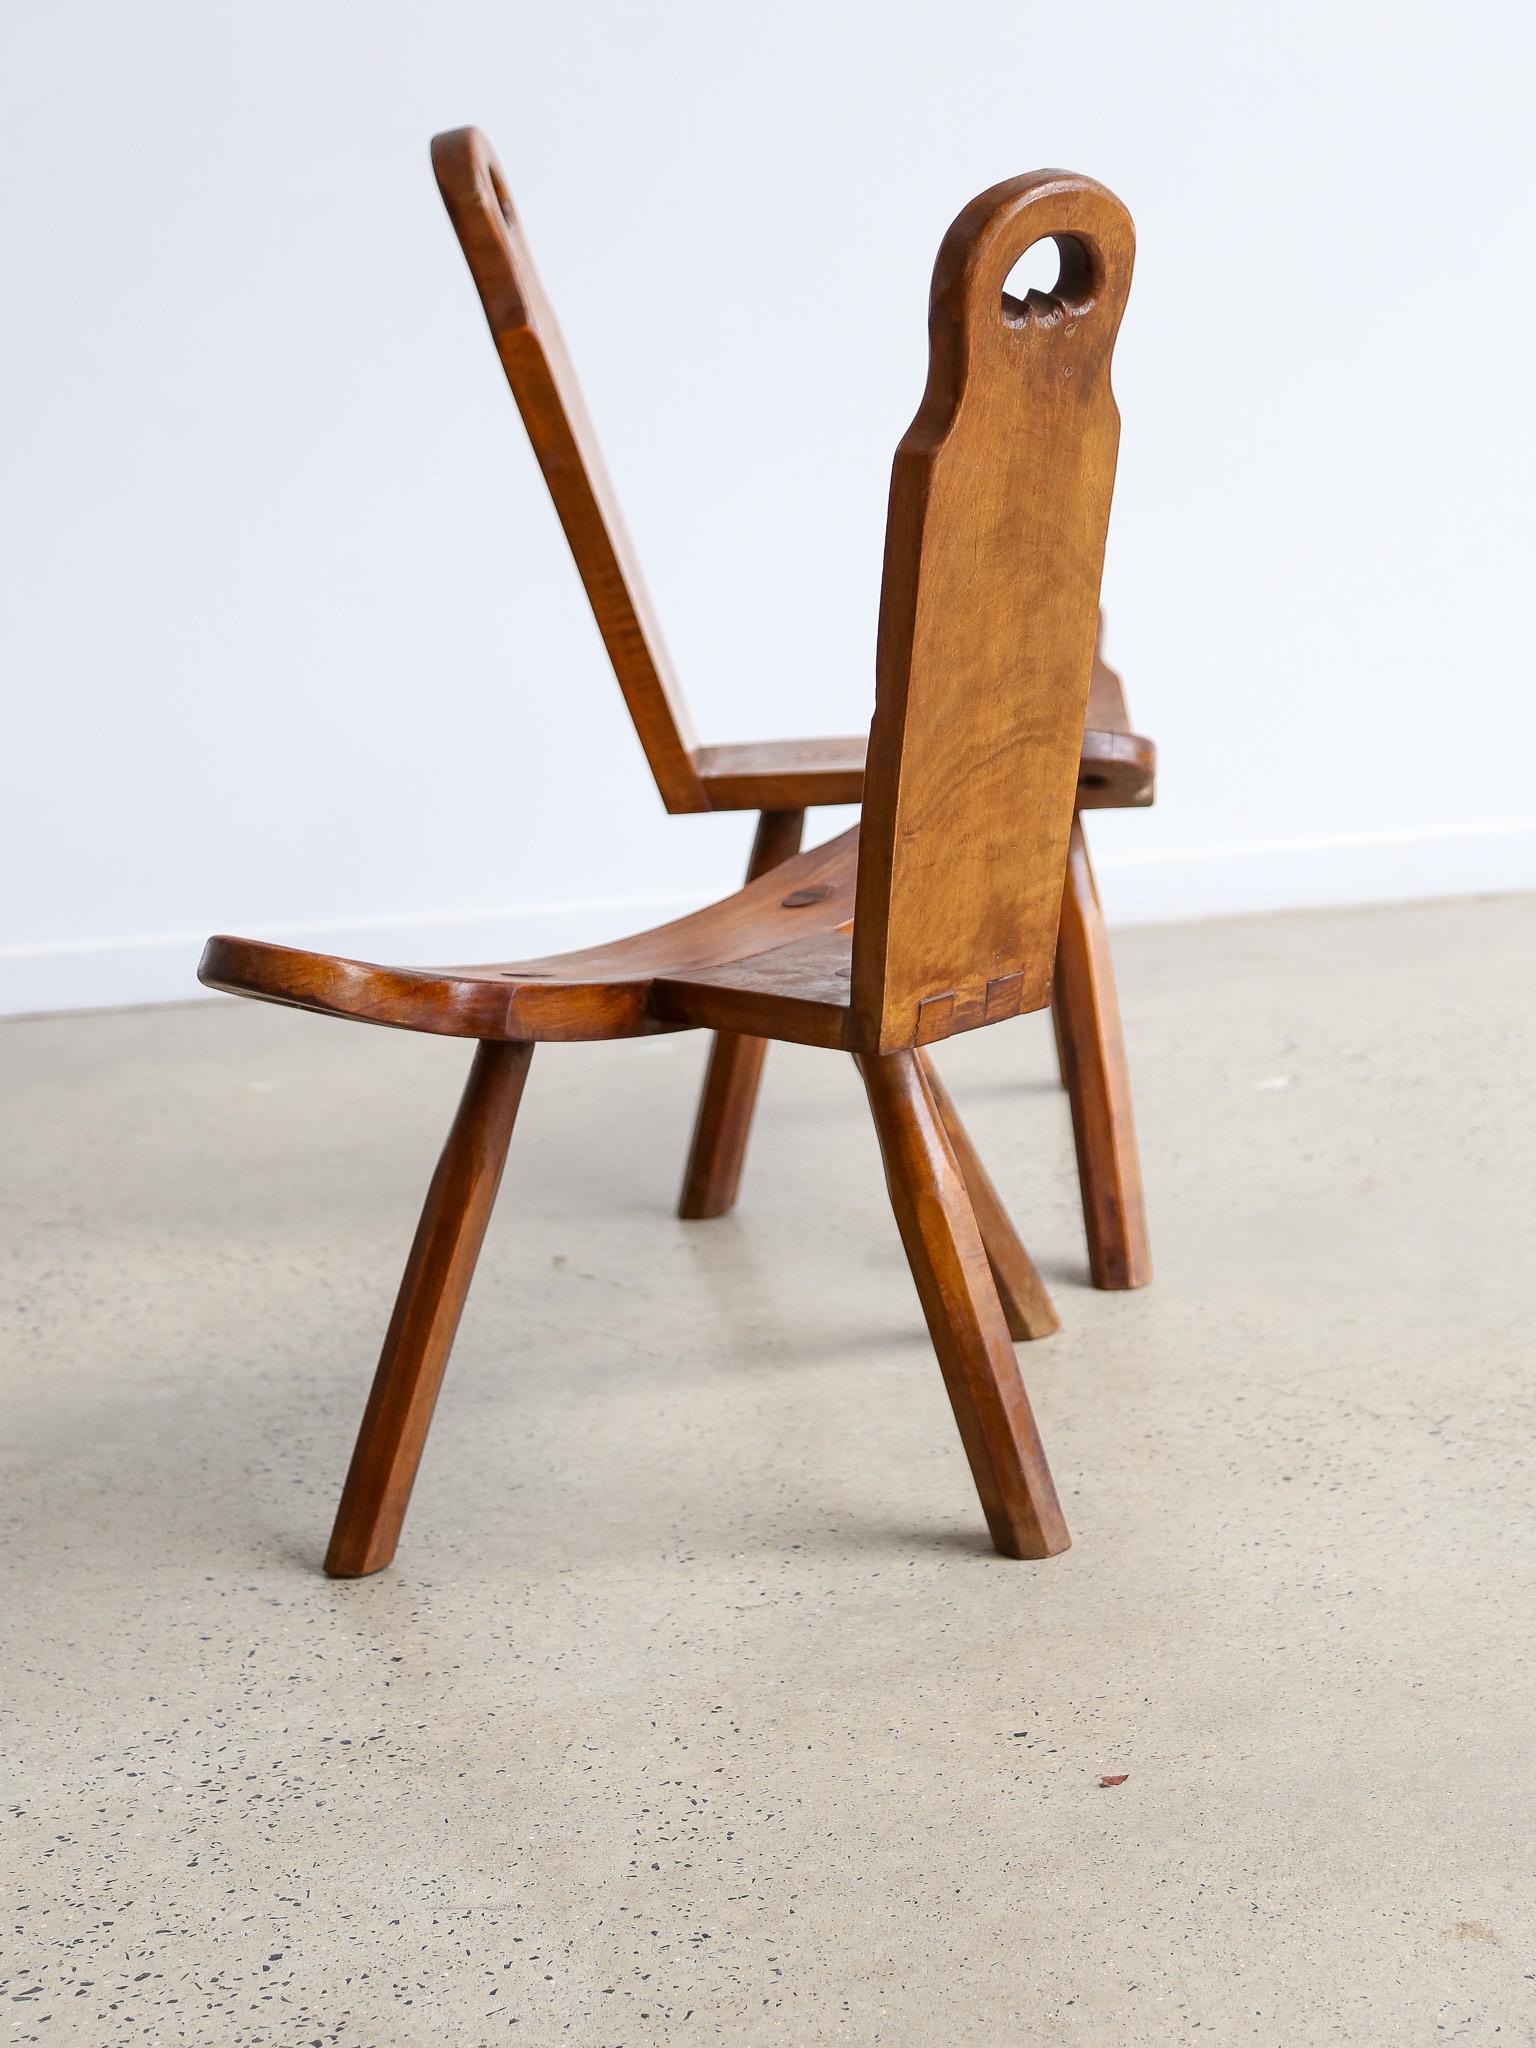 Wood Brutalist Spanish Midcentury Sculptural Tripod Chair For Sale